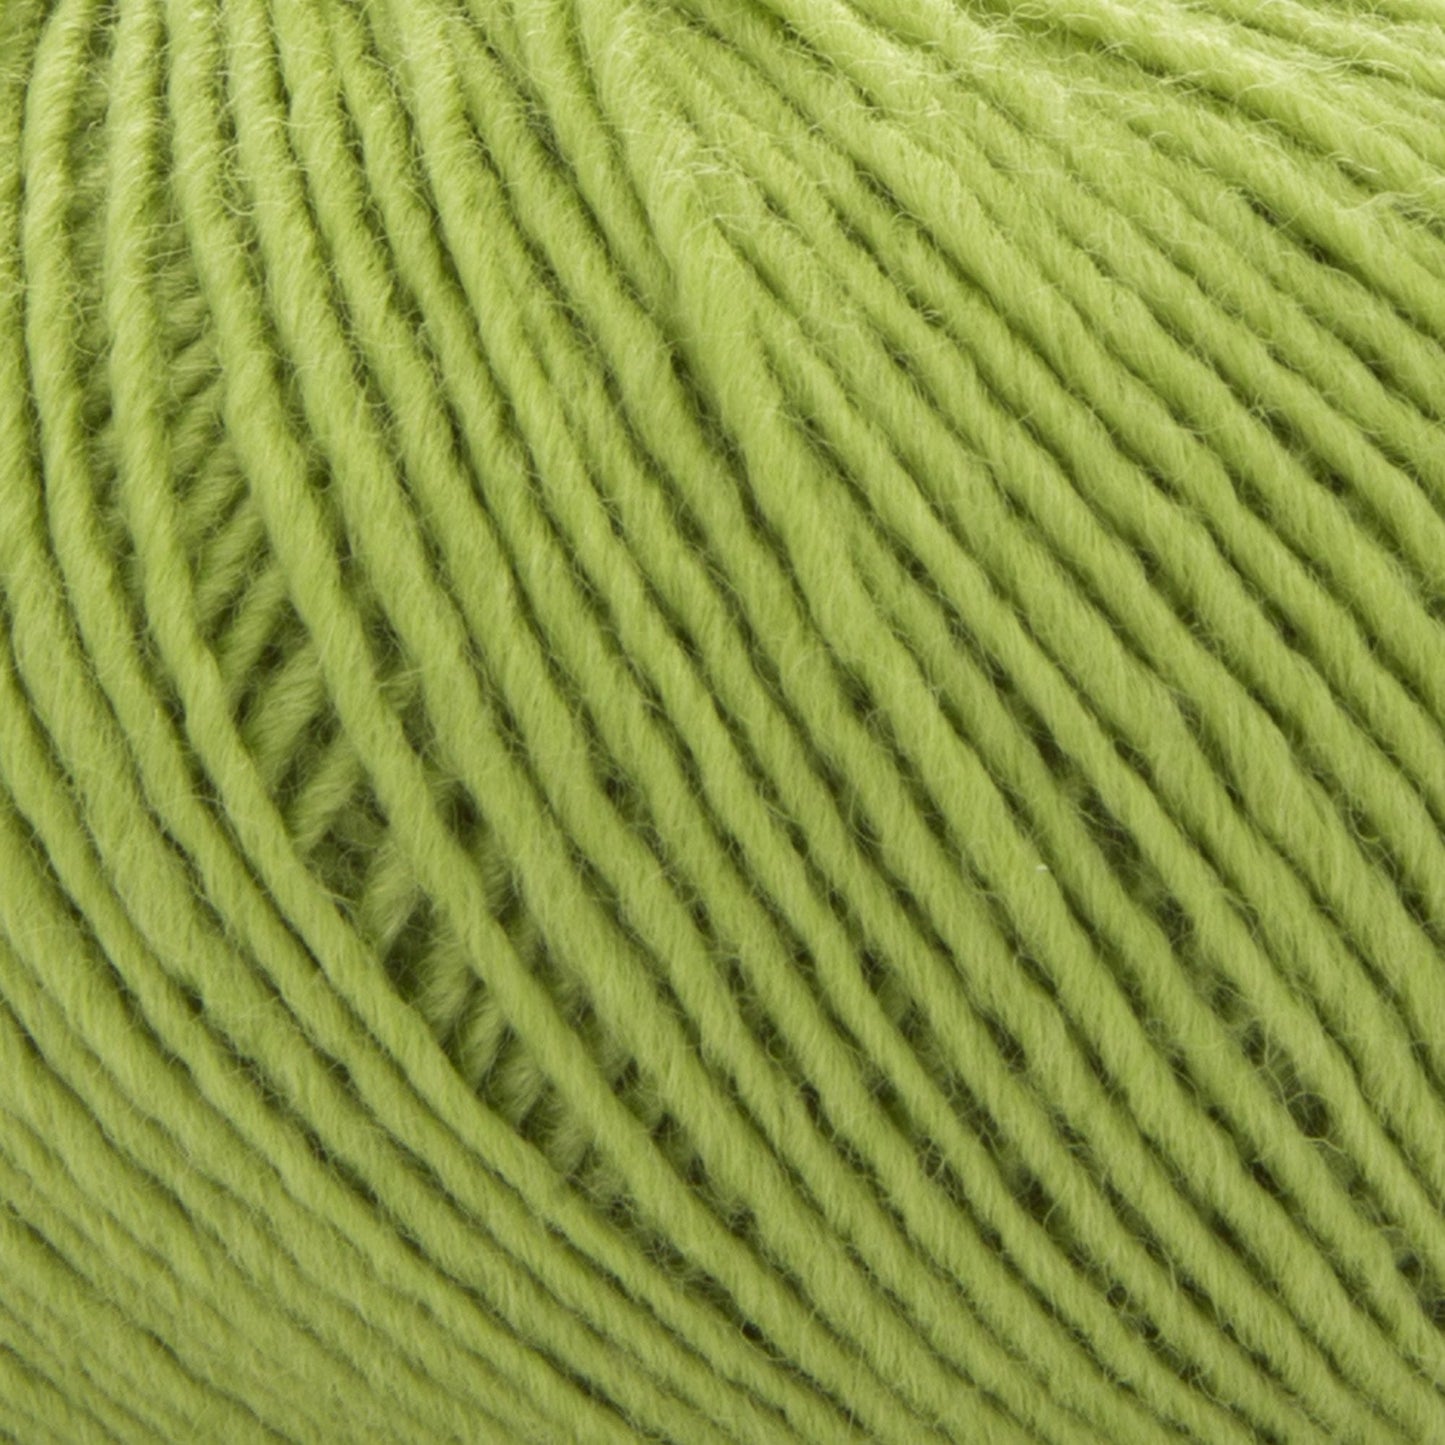 ggh Lacy | Set of 4 x 25g (total 100g) - 006 - Apple Green